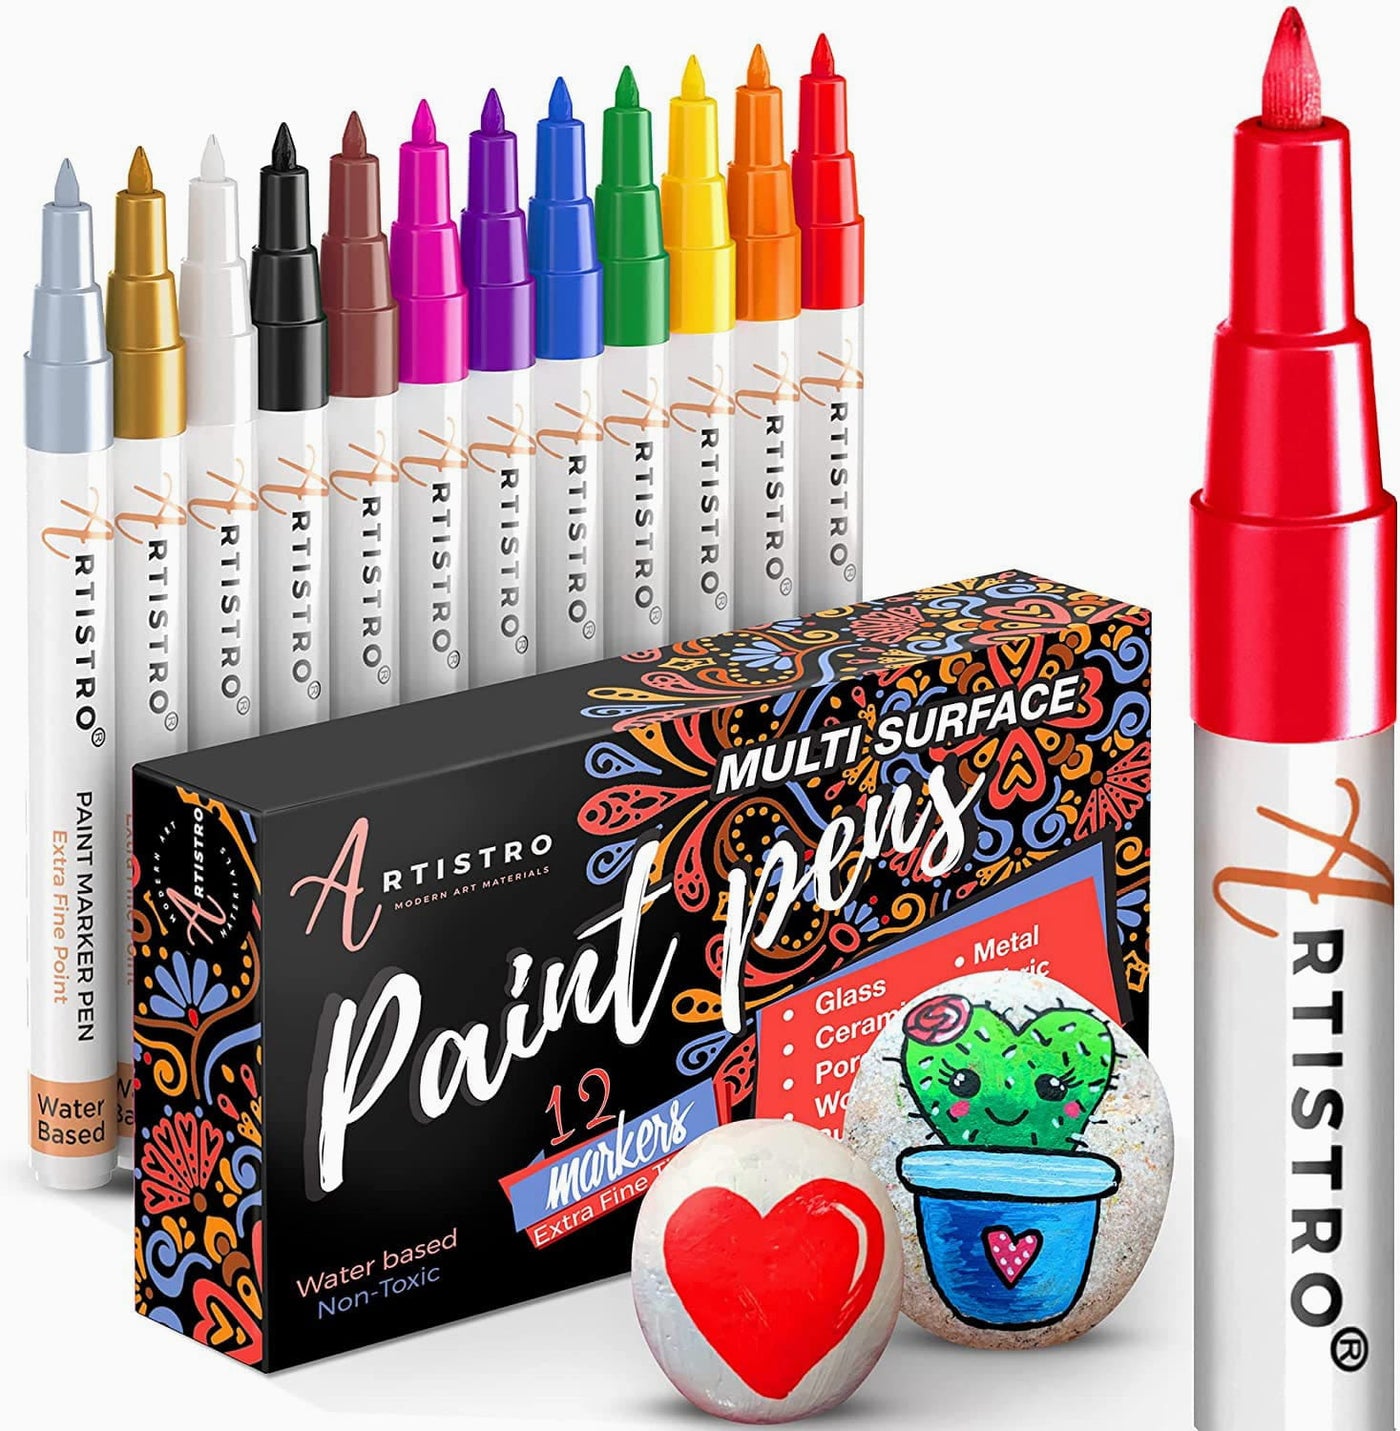 21 Black and White Acrylic Paint Markers Paint Pens Set 0.7mm Extra Fine and 3.0mm Medium Tip for Rock Painting Canvas Mugs Metal Glass Paint